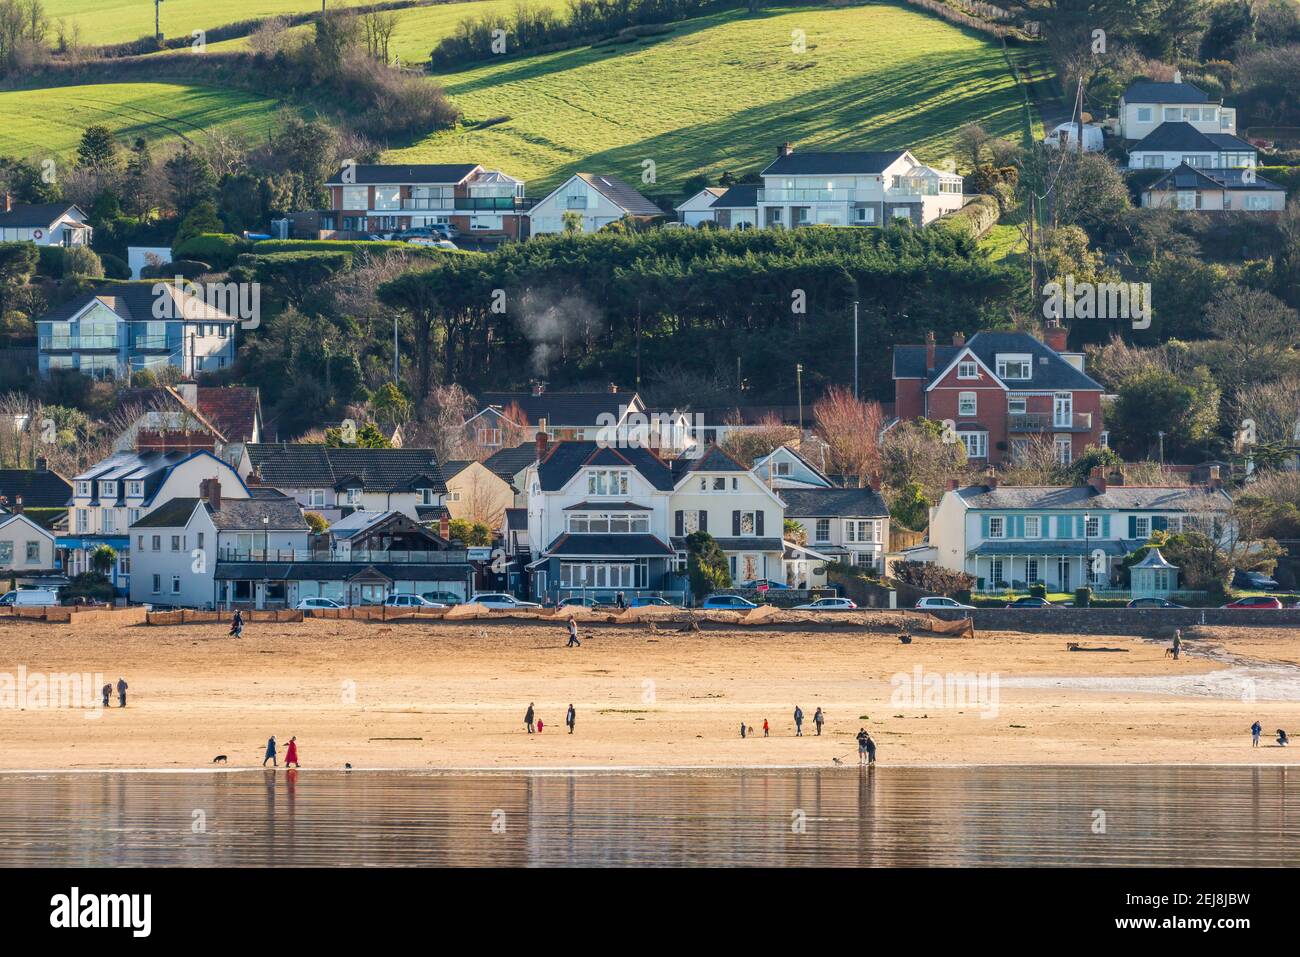 Instow, North Devon, England. Monday 22nd February 2021. UK Weather. After a week of grey skies in North Devon, a brighter start to the new week tempts people out for a 'socially distanced' walk on the beach for their daily exercise at the picturesque coastal village of Instow. Credit: Terry Mathews/Alamy Live News Stock Photo